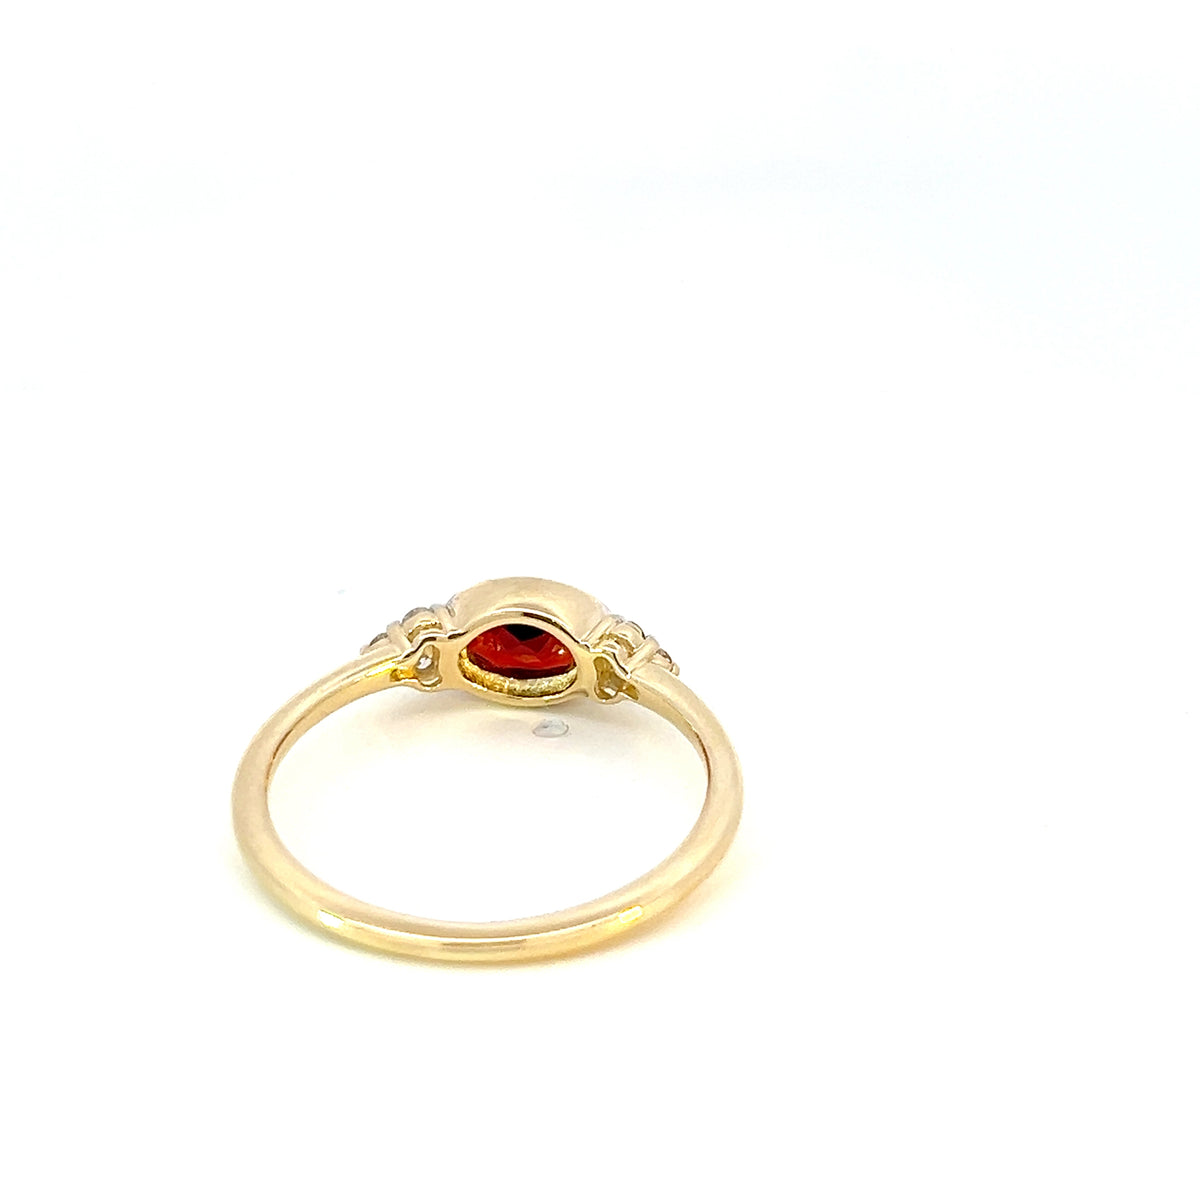 10K Yellow Gold 0.58cttw Genuine Garnet and 0.08cttw Diamond Ring, size 6.5